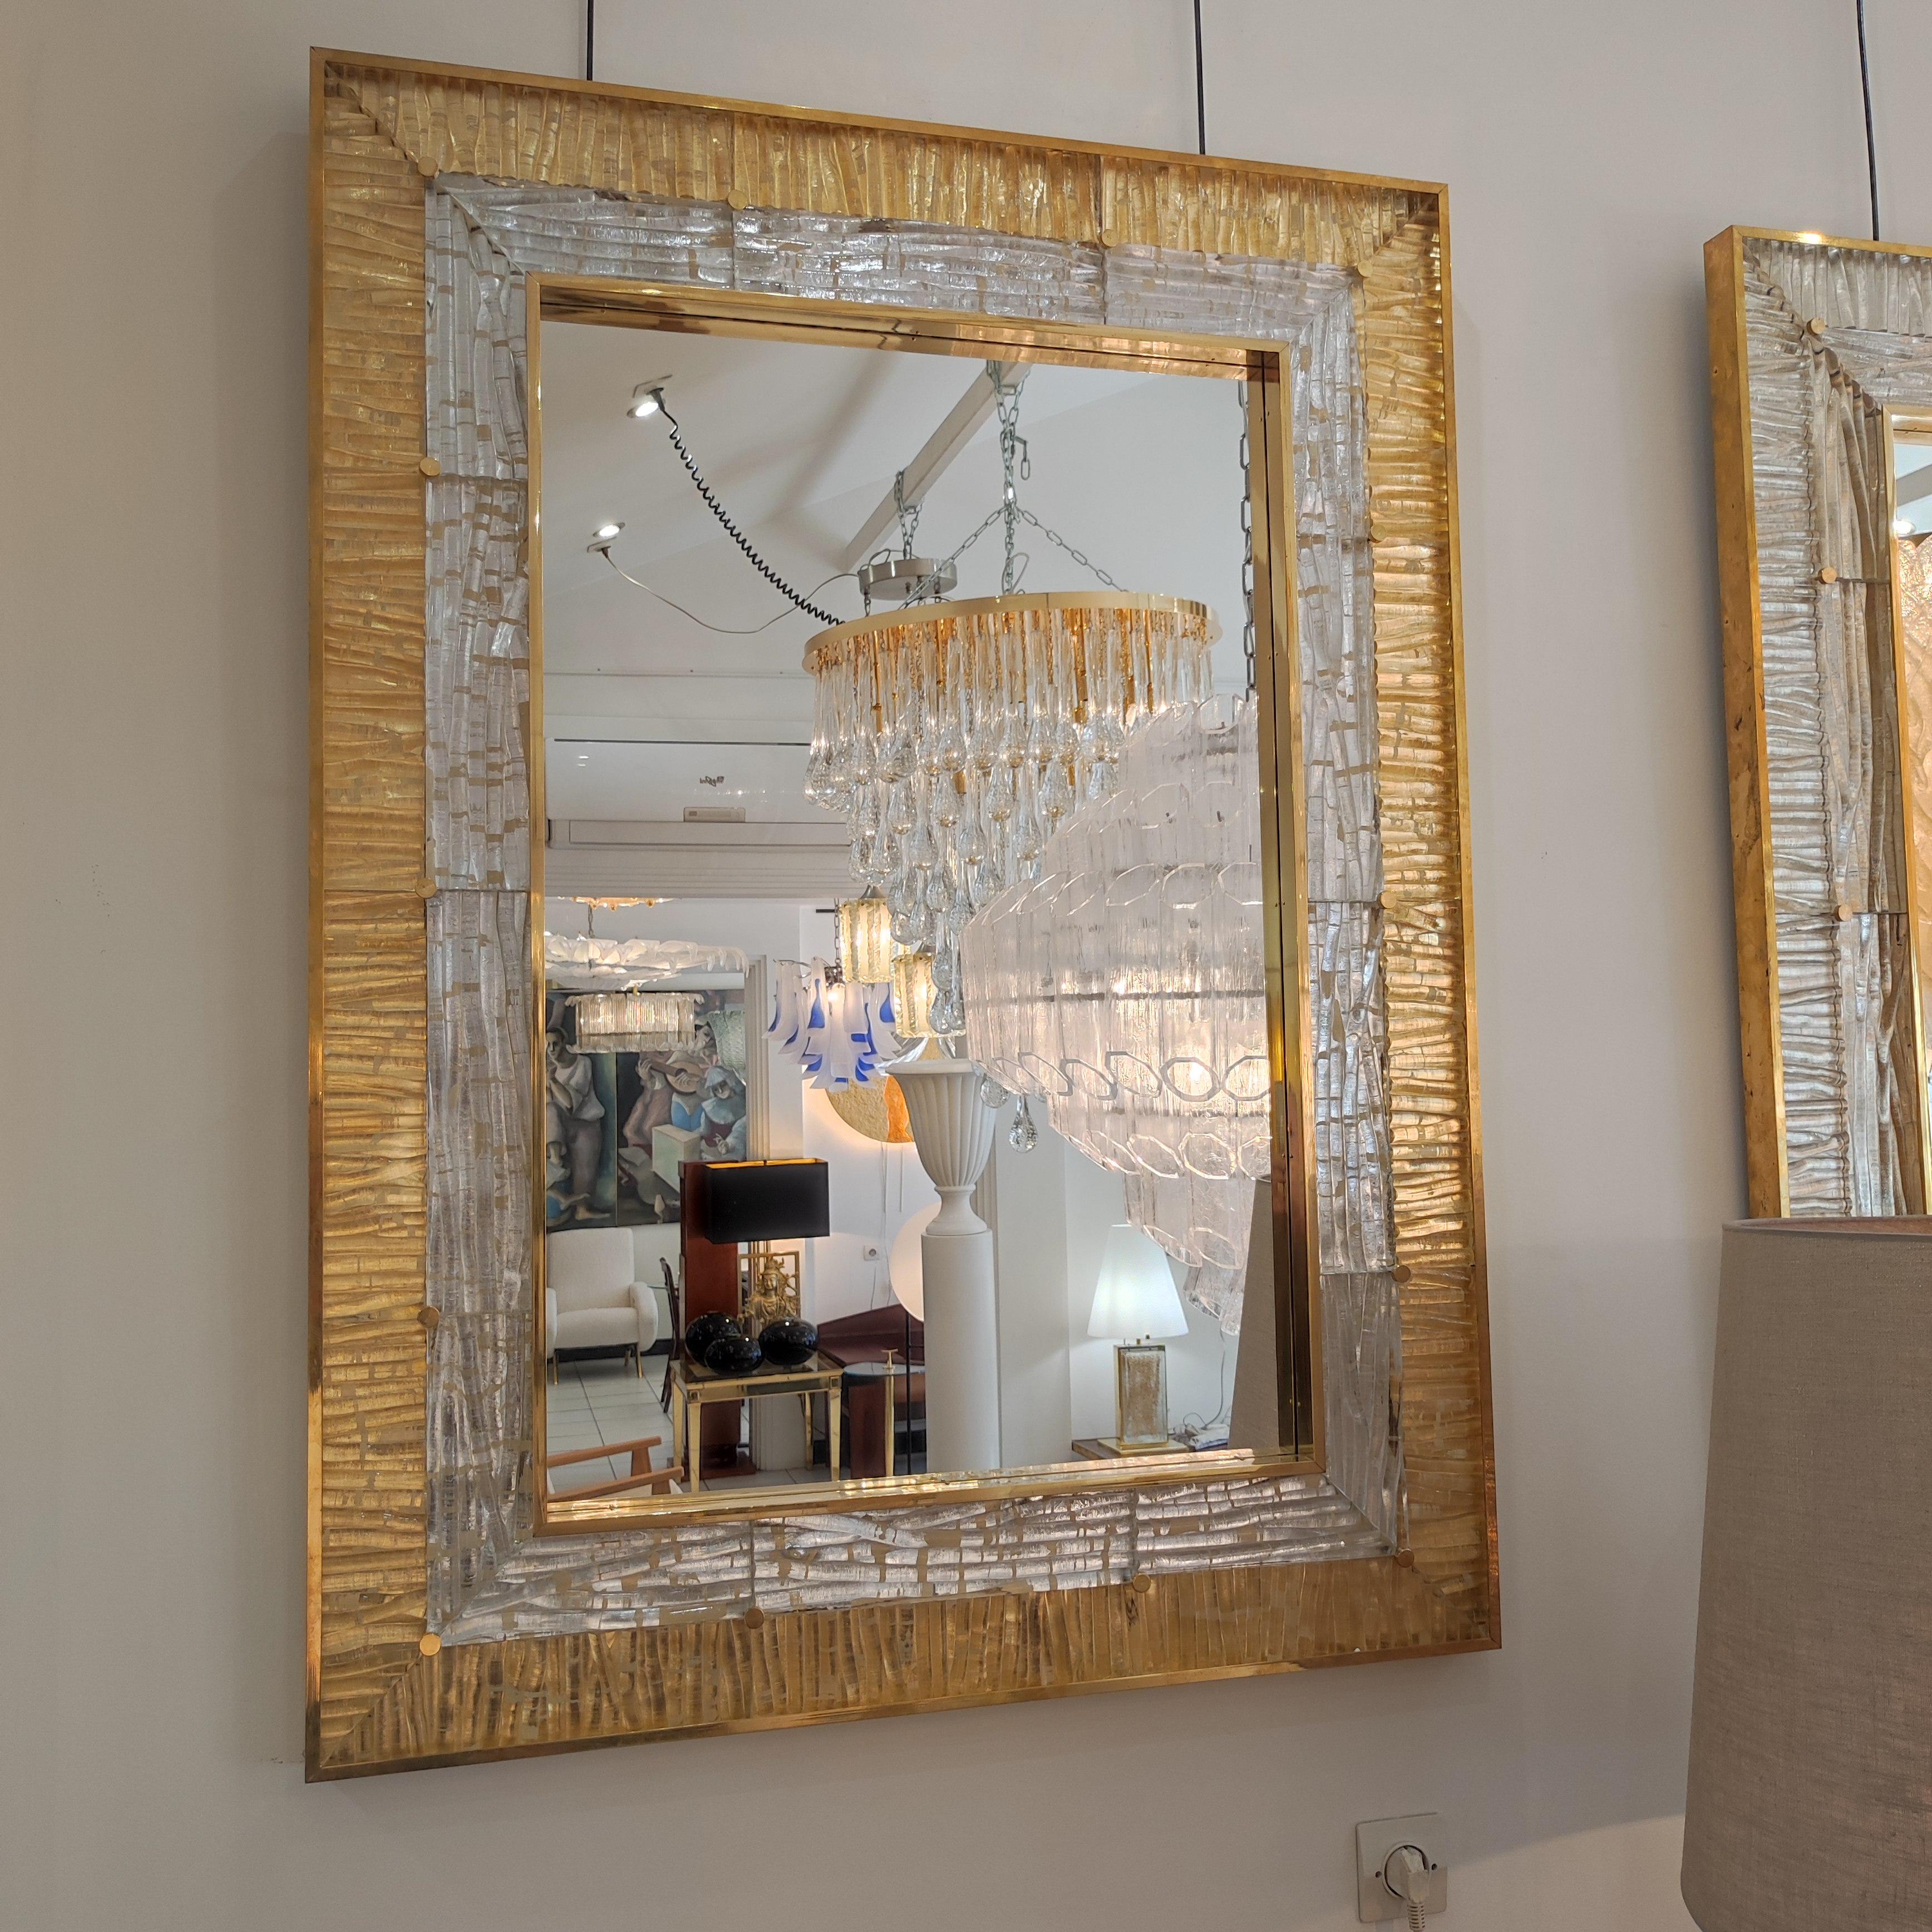  Large Crystal Murano Glass and Brass Mirror For Sale 2